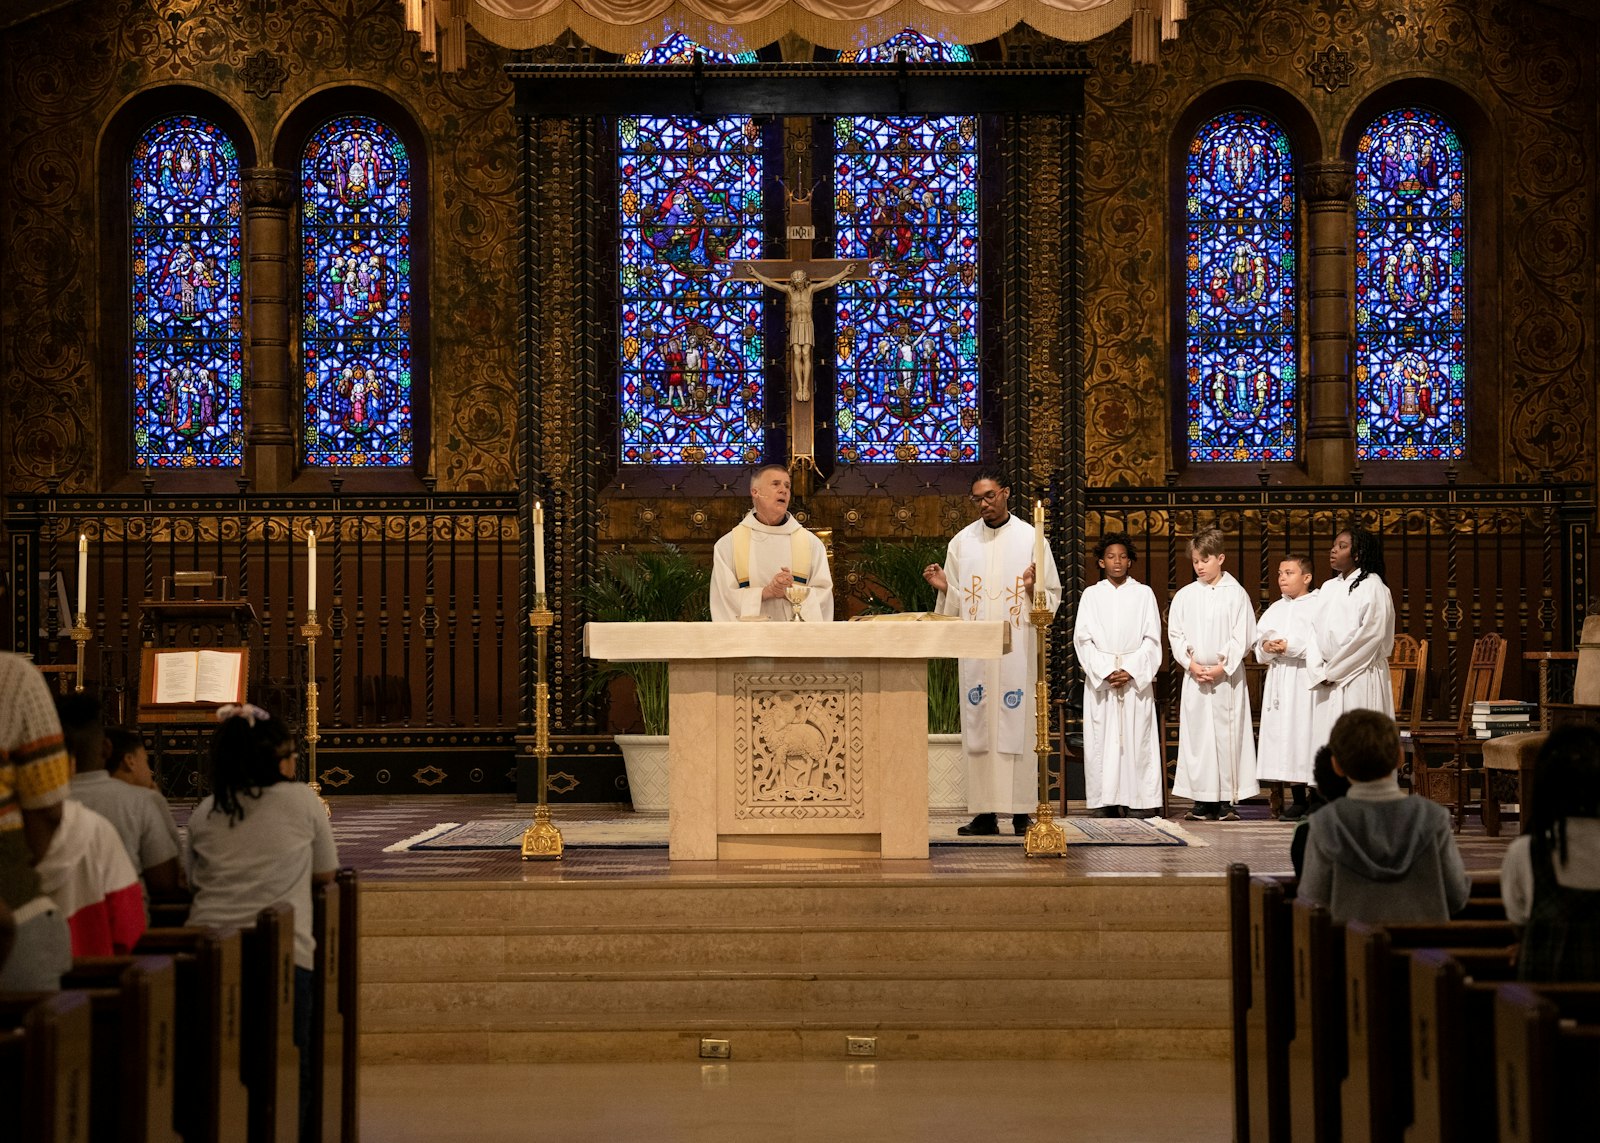 Fr. Lorn Snow, SJ, pastor at Gesu, celebrates Mass alongside Fr. Smith on May 31. After attending Gesu Catholic School as a child, Fr. Smith attended and graduated from University of Detroit Jesuit High School before eventually discerning the priesthood.